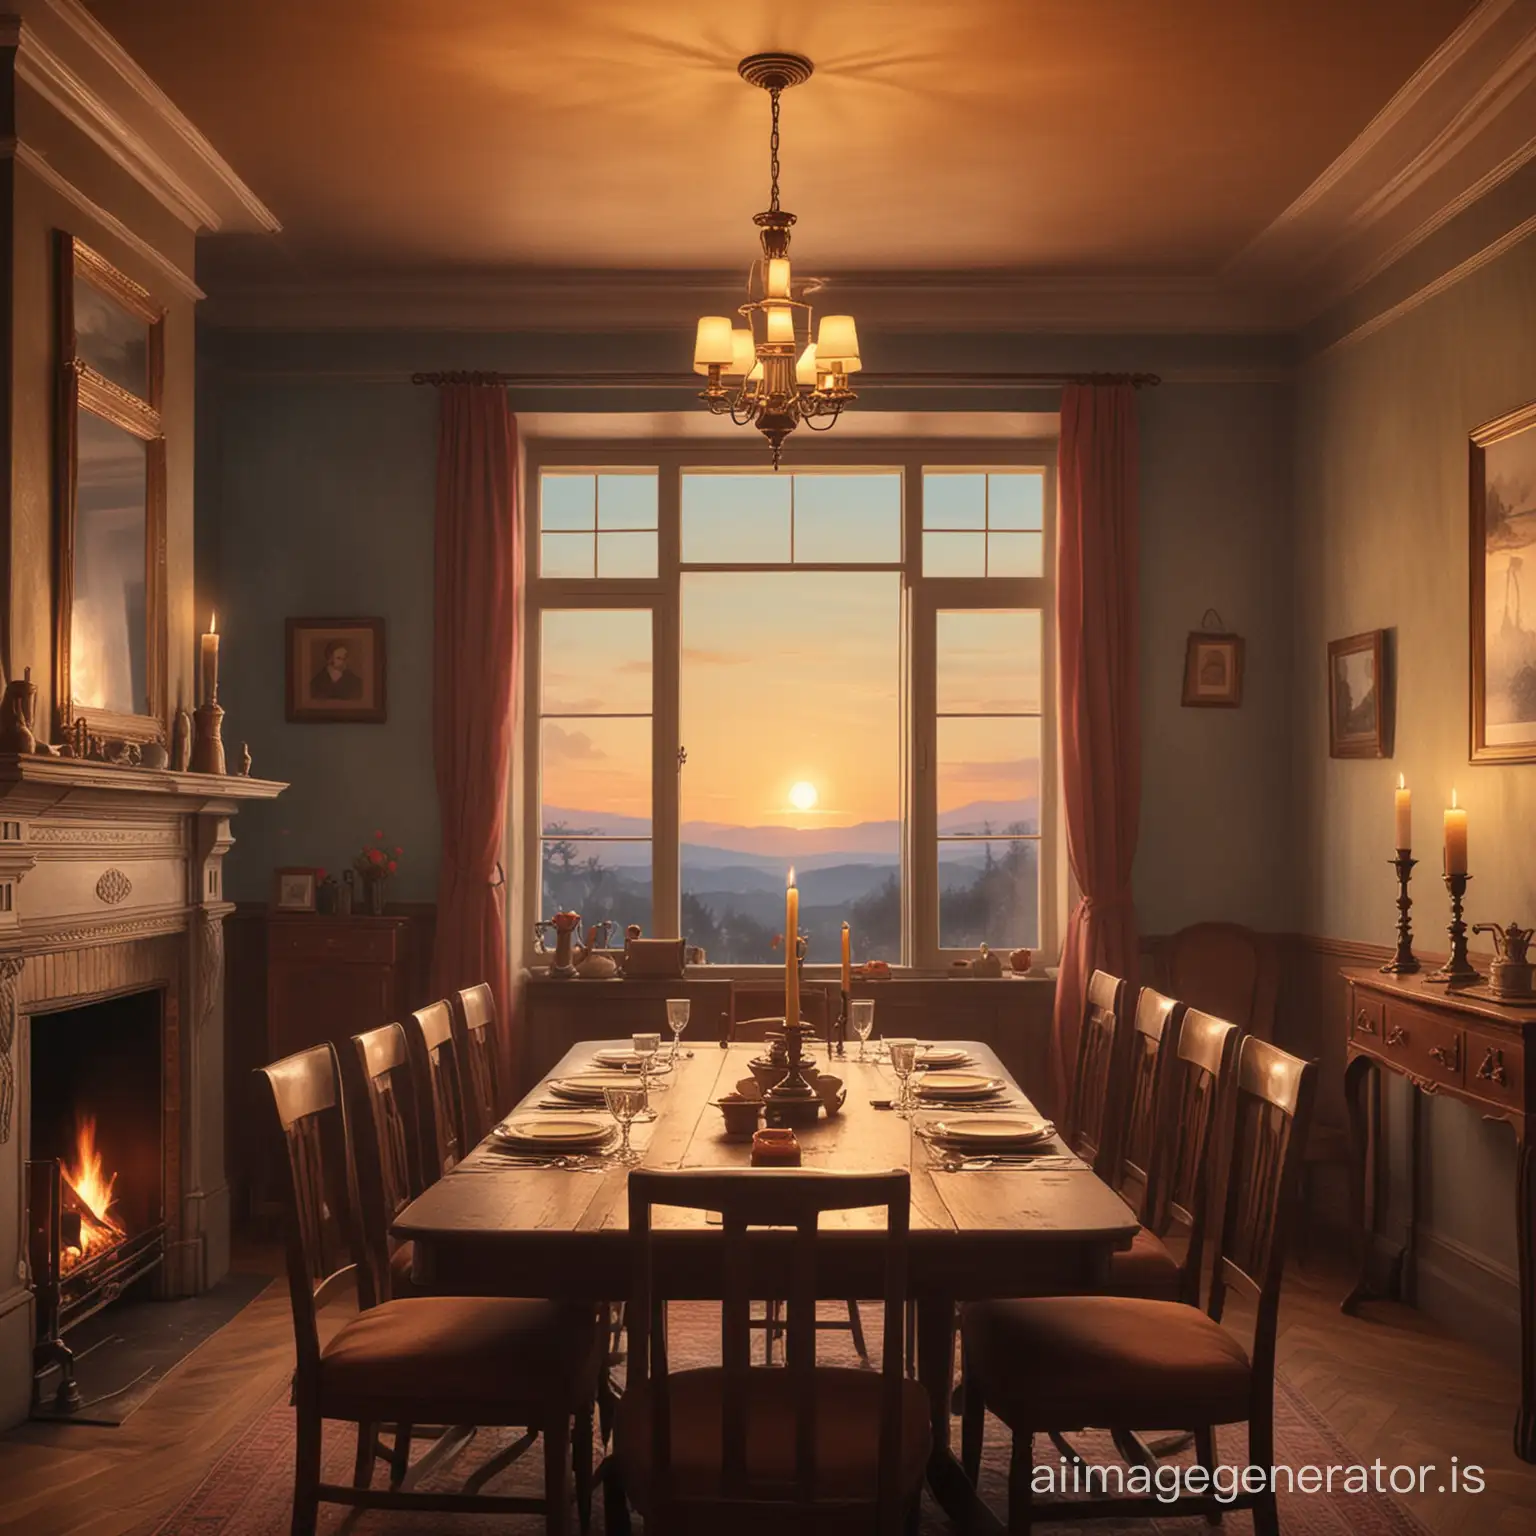 A 1920s luxurious dinning room, with a fireplace, a window with the late evening sky peeking through, with one lonely candle at the corner of the room, in a 1920s slight illustration style, slightly illustrated, in a style of a communist poster